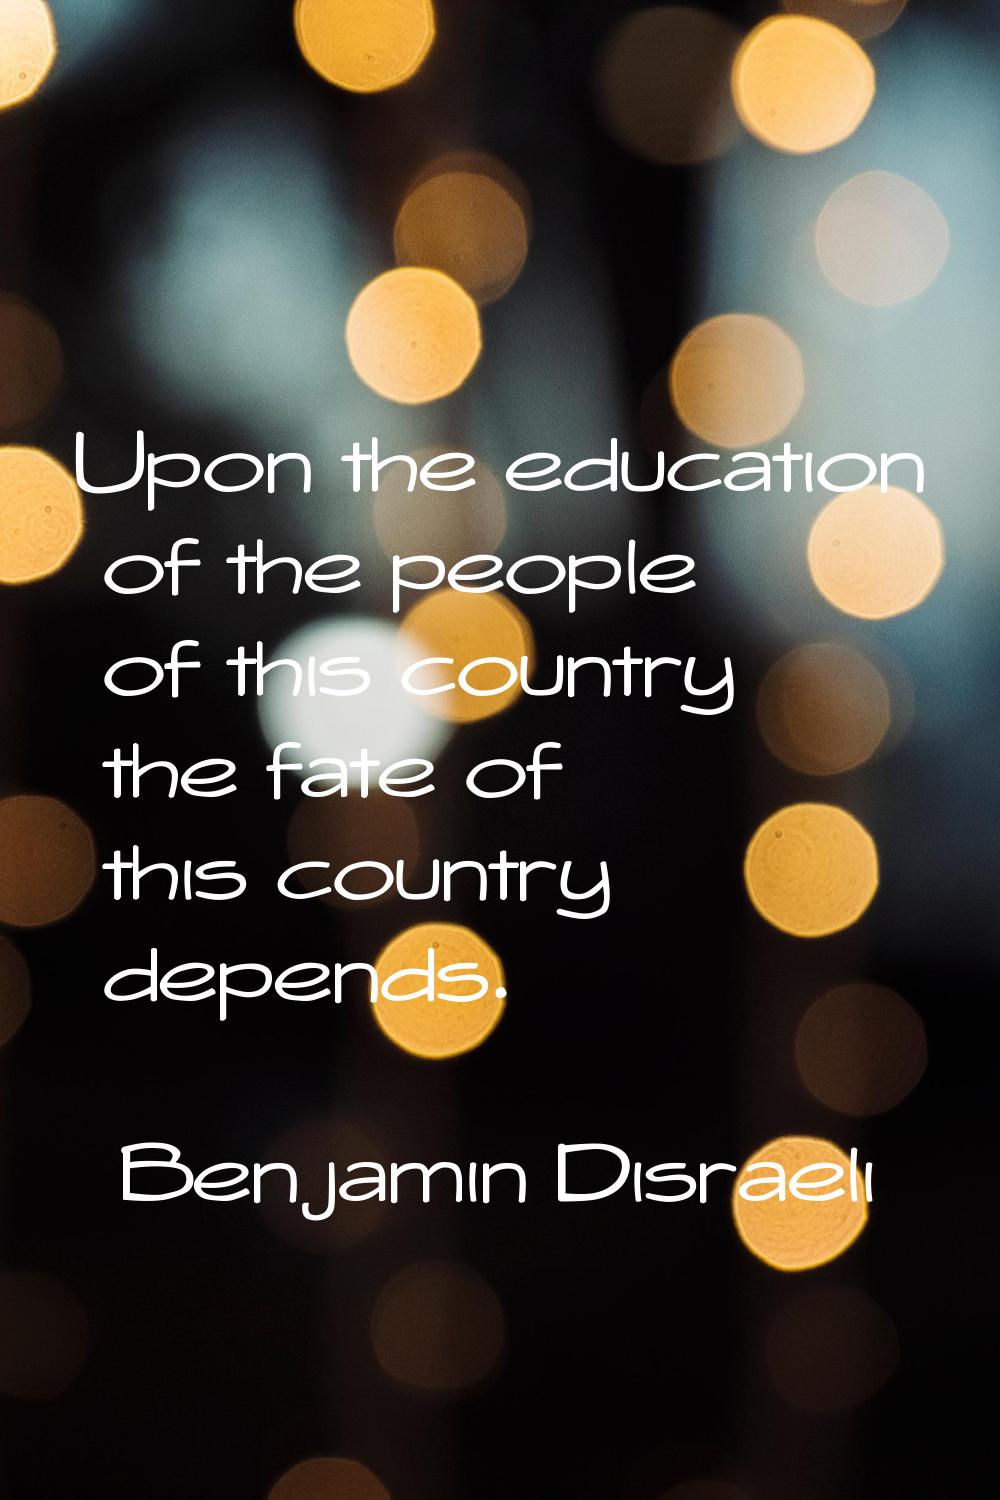 Upon the education of the people of this country the fate of this country depends.